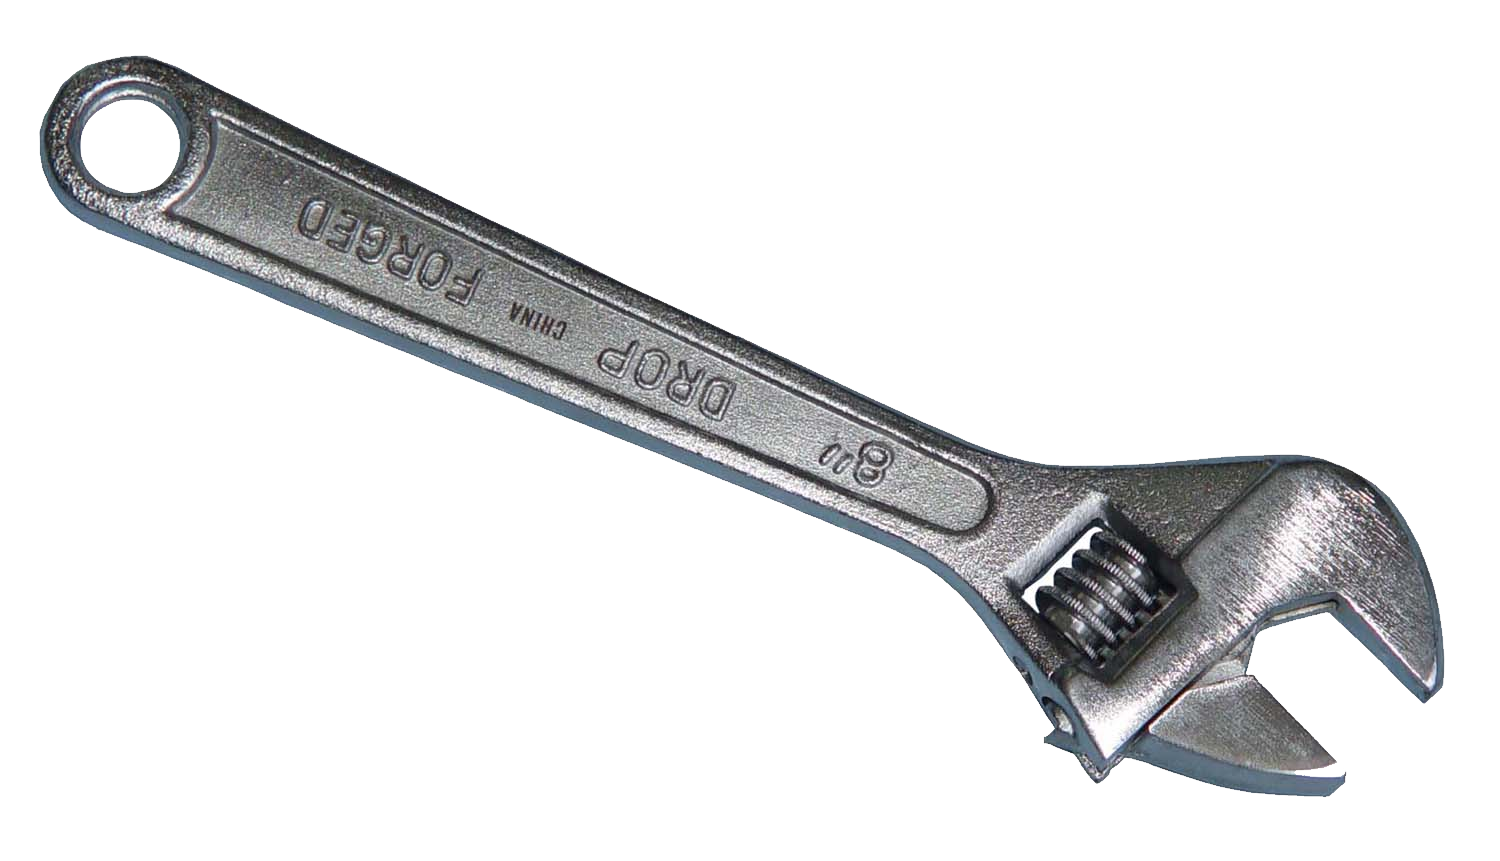 Wrench PNG Pic